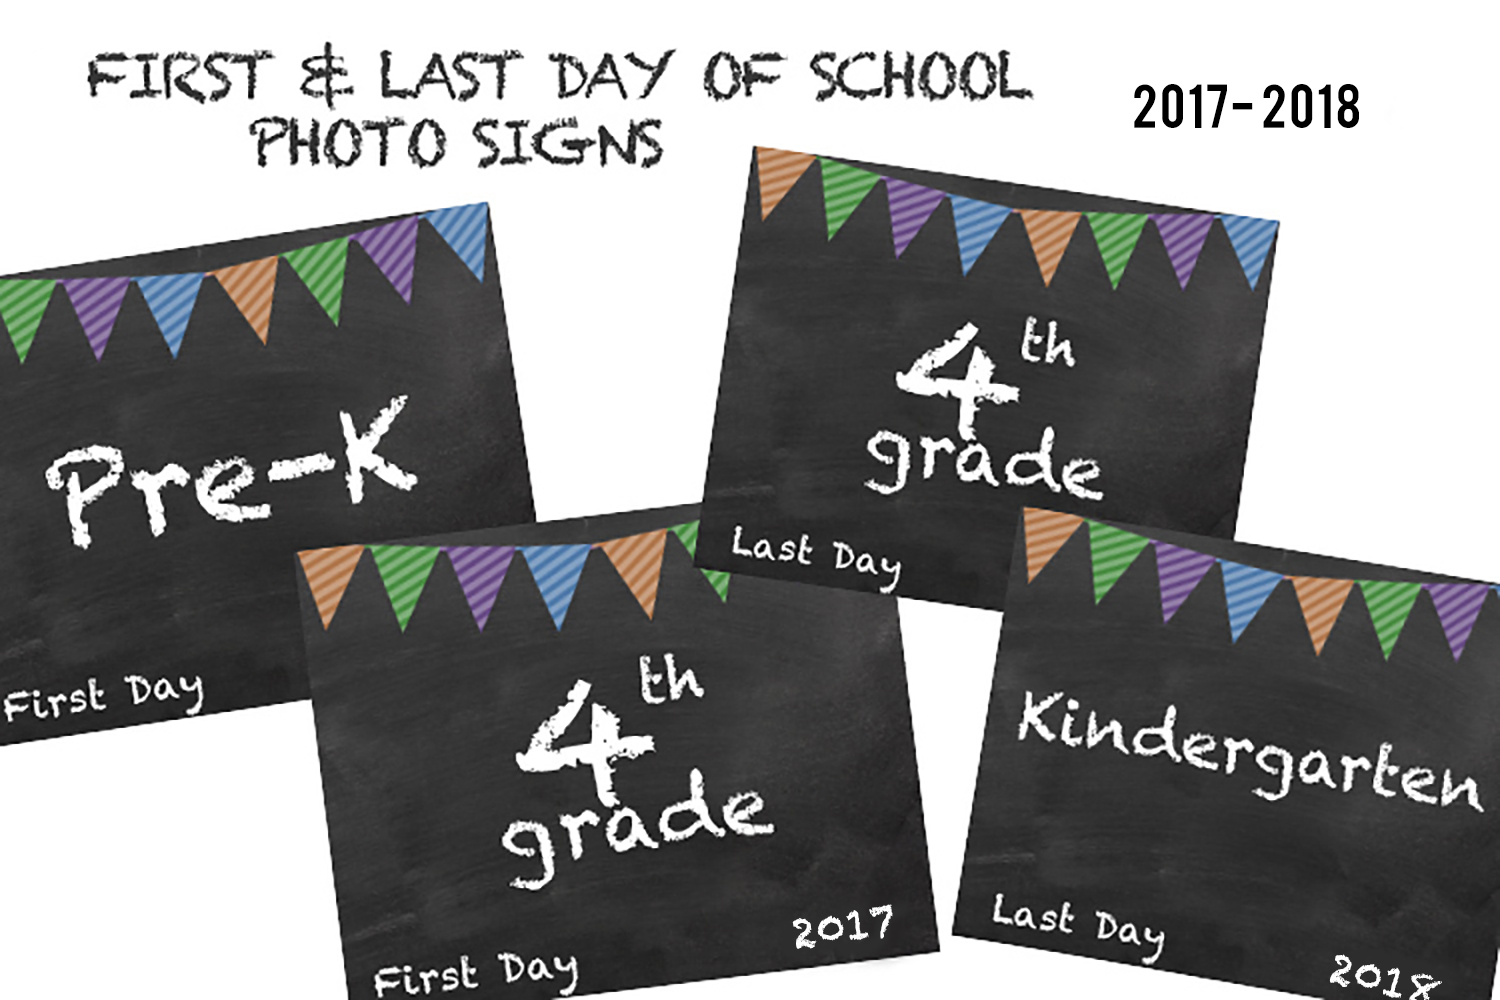 Document back to school with a cute first day of school sign. And use the free interview template to capture your childs interests this school year!